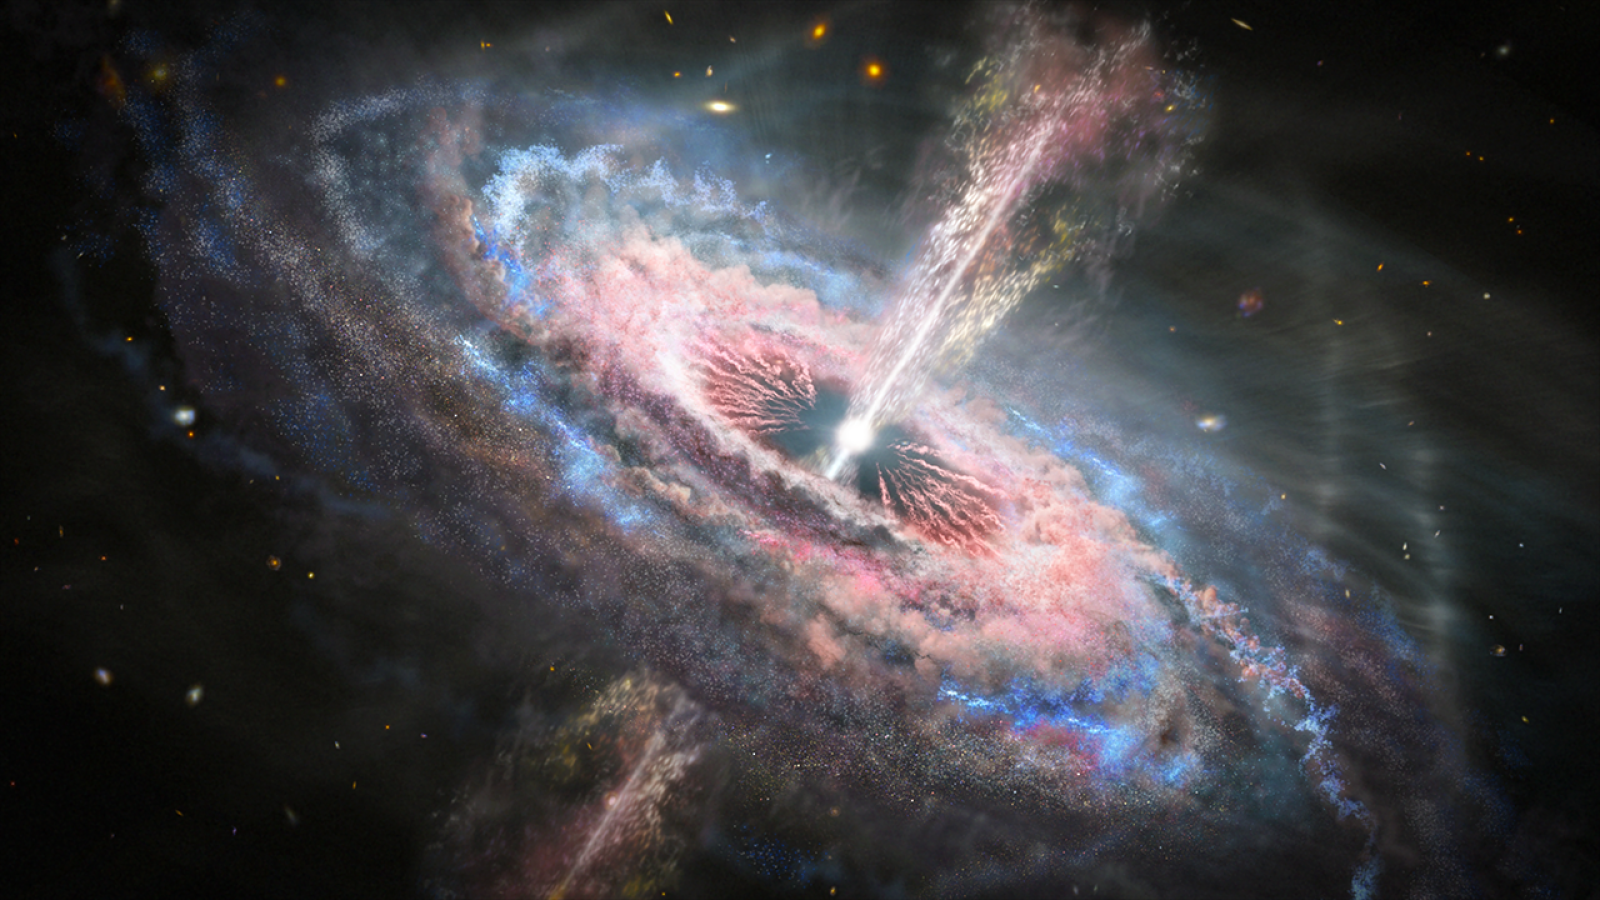 Artist visualization of energetic outflows from a quasar (courtesy NASA)